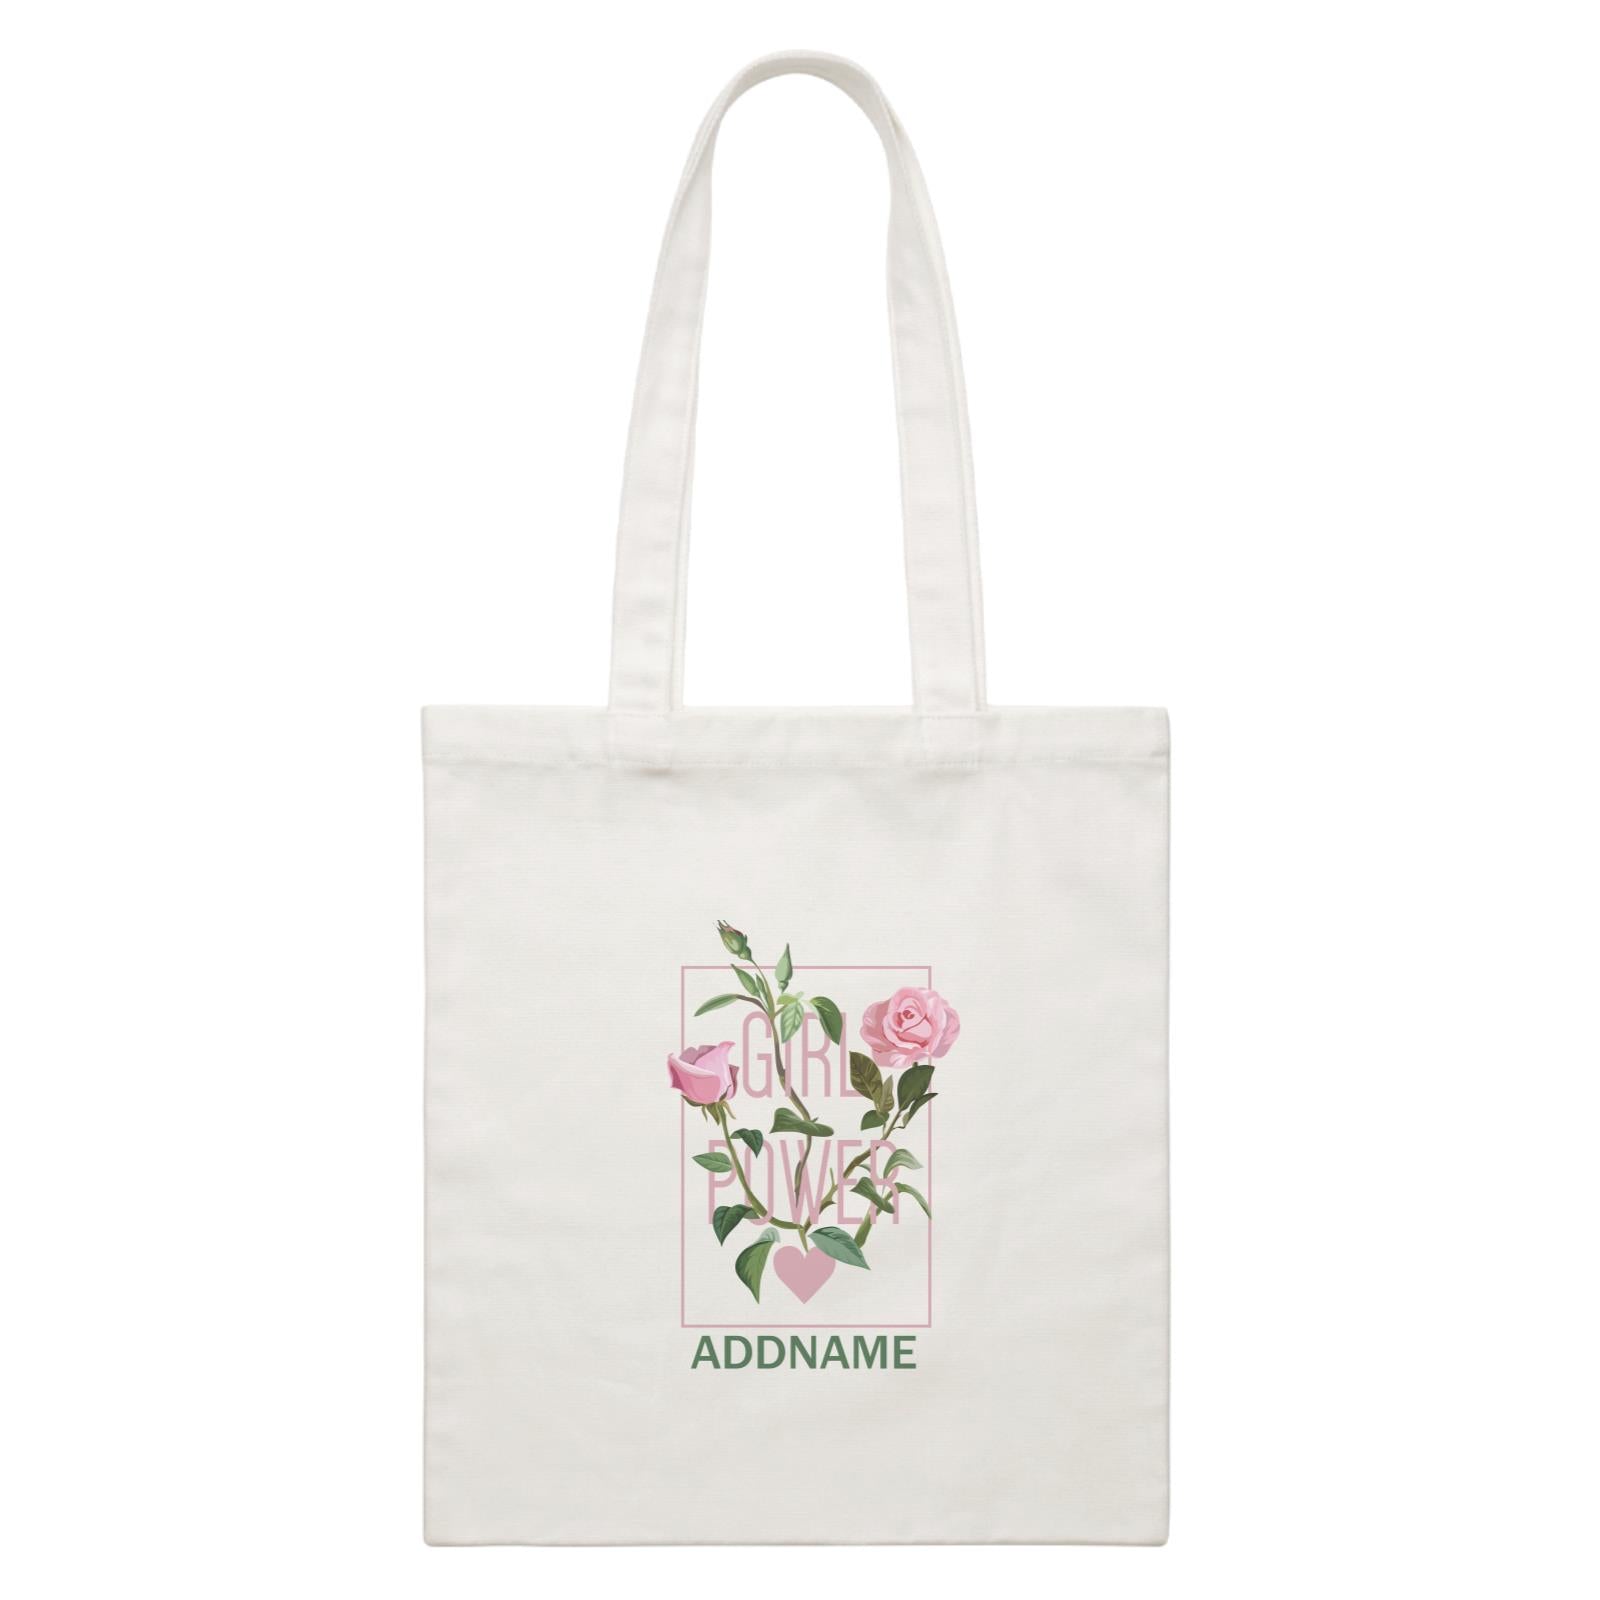 Cool Chic Flowers Pink Roses Girl Power With Addname White Canvas Bag